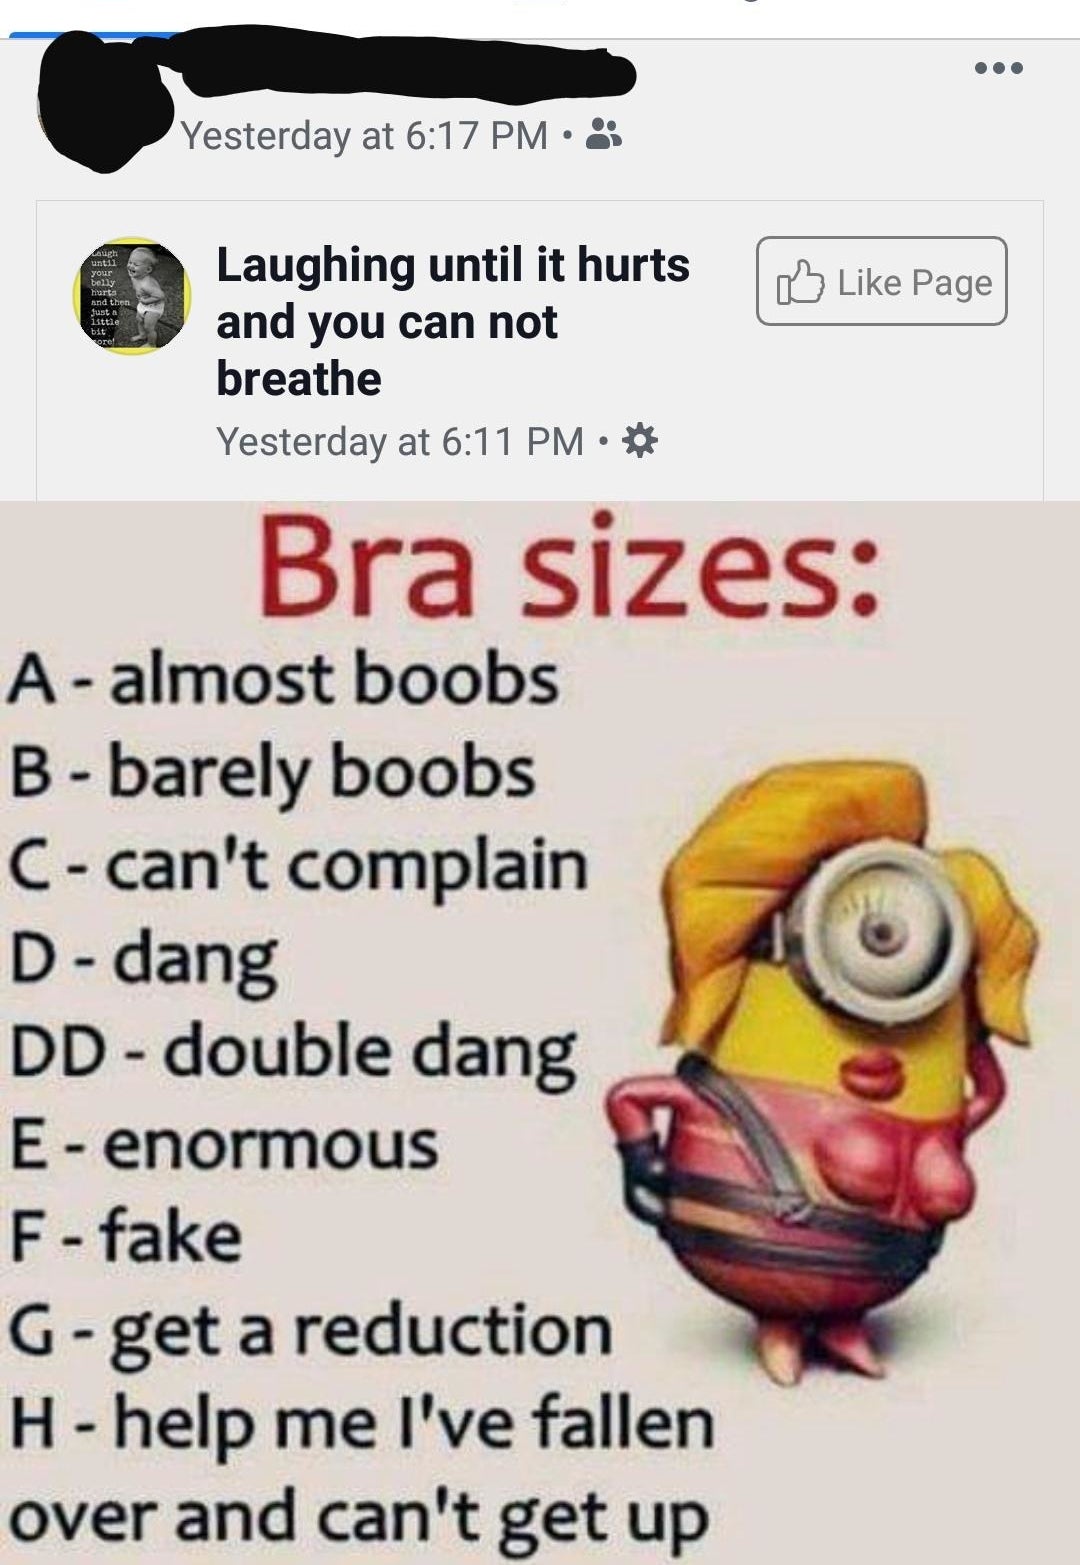 A particularly horrendous Minions meme that goes through what the various bra size letters stand for, for example DD is &quot;double dang&quot;